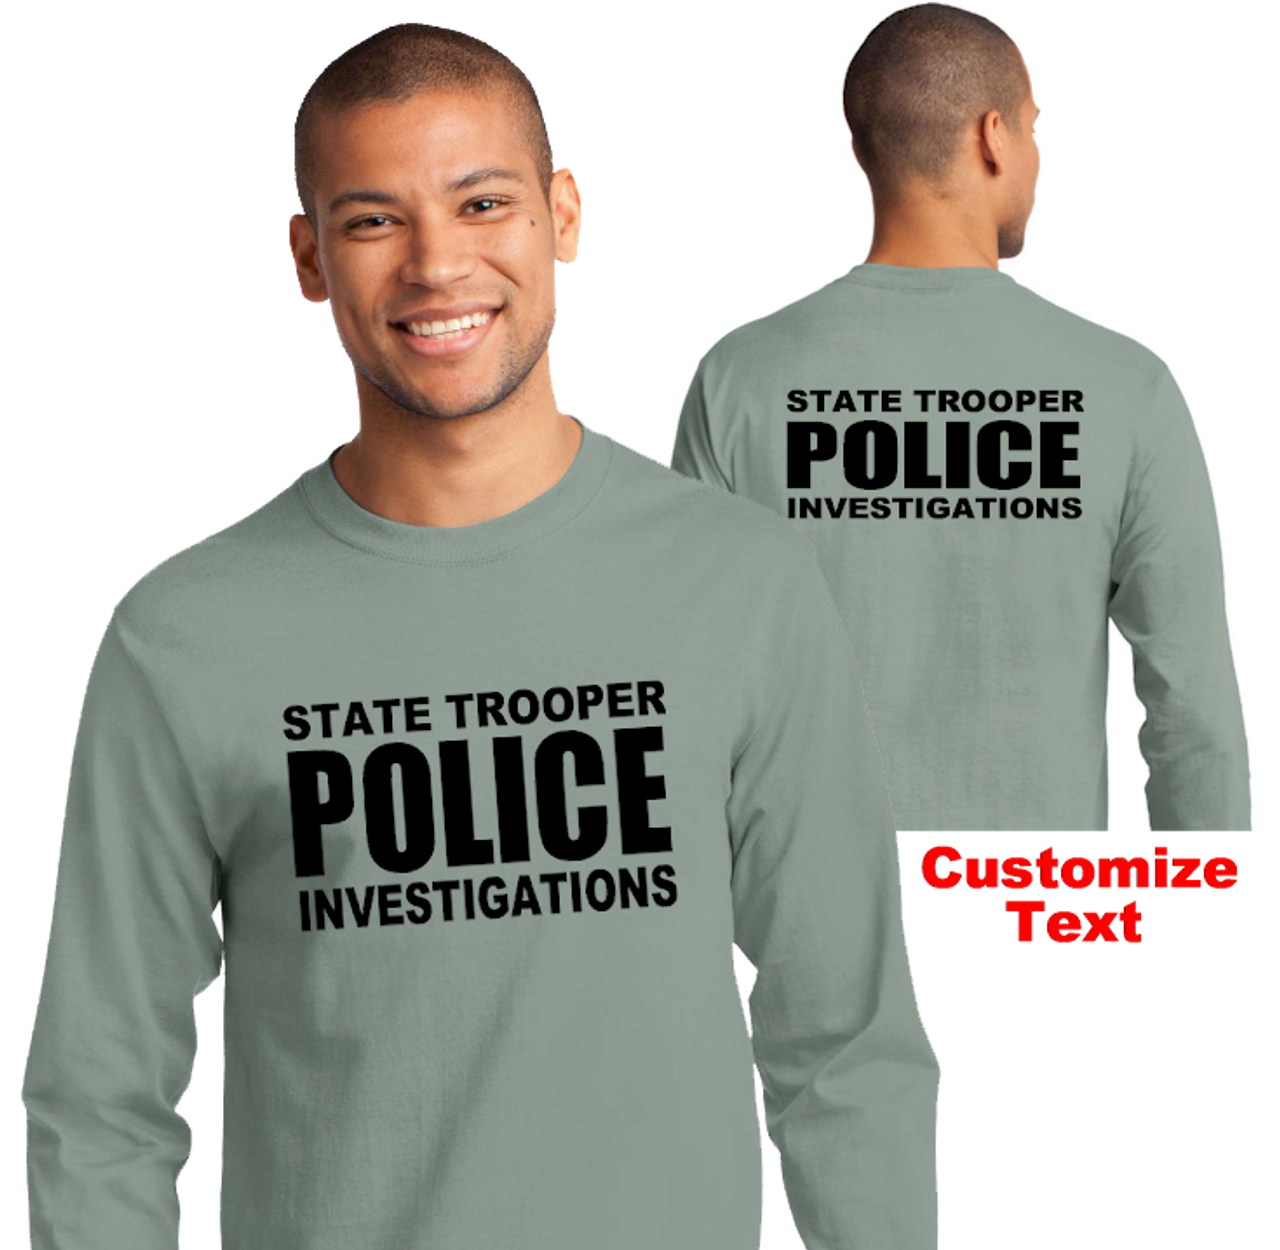 Blueline Tee's - Enforcement Tee's – Back the Blue Apparel - Police Tees – Cops T-shirts – Police Tactical Tees – Police T-shirts – Custom Embroidery Custom printing